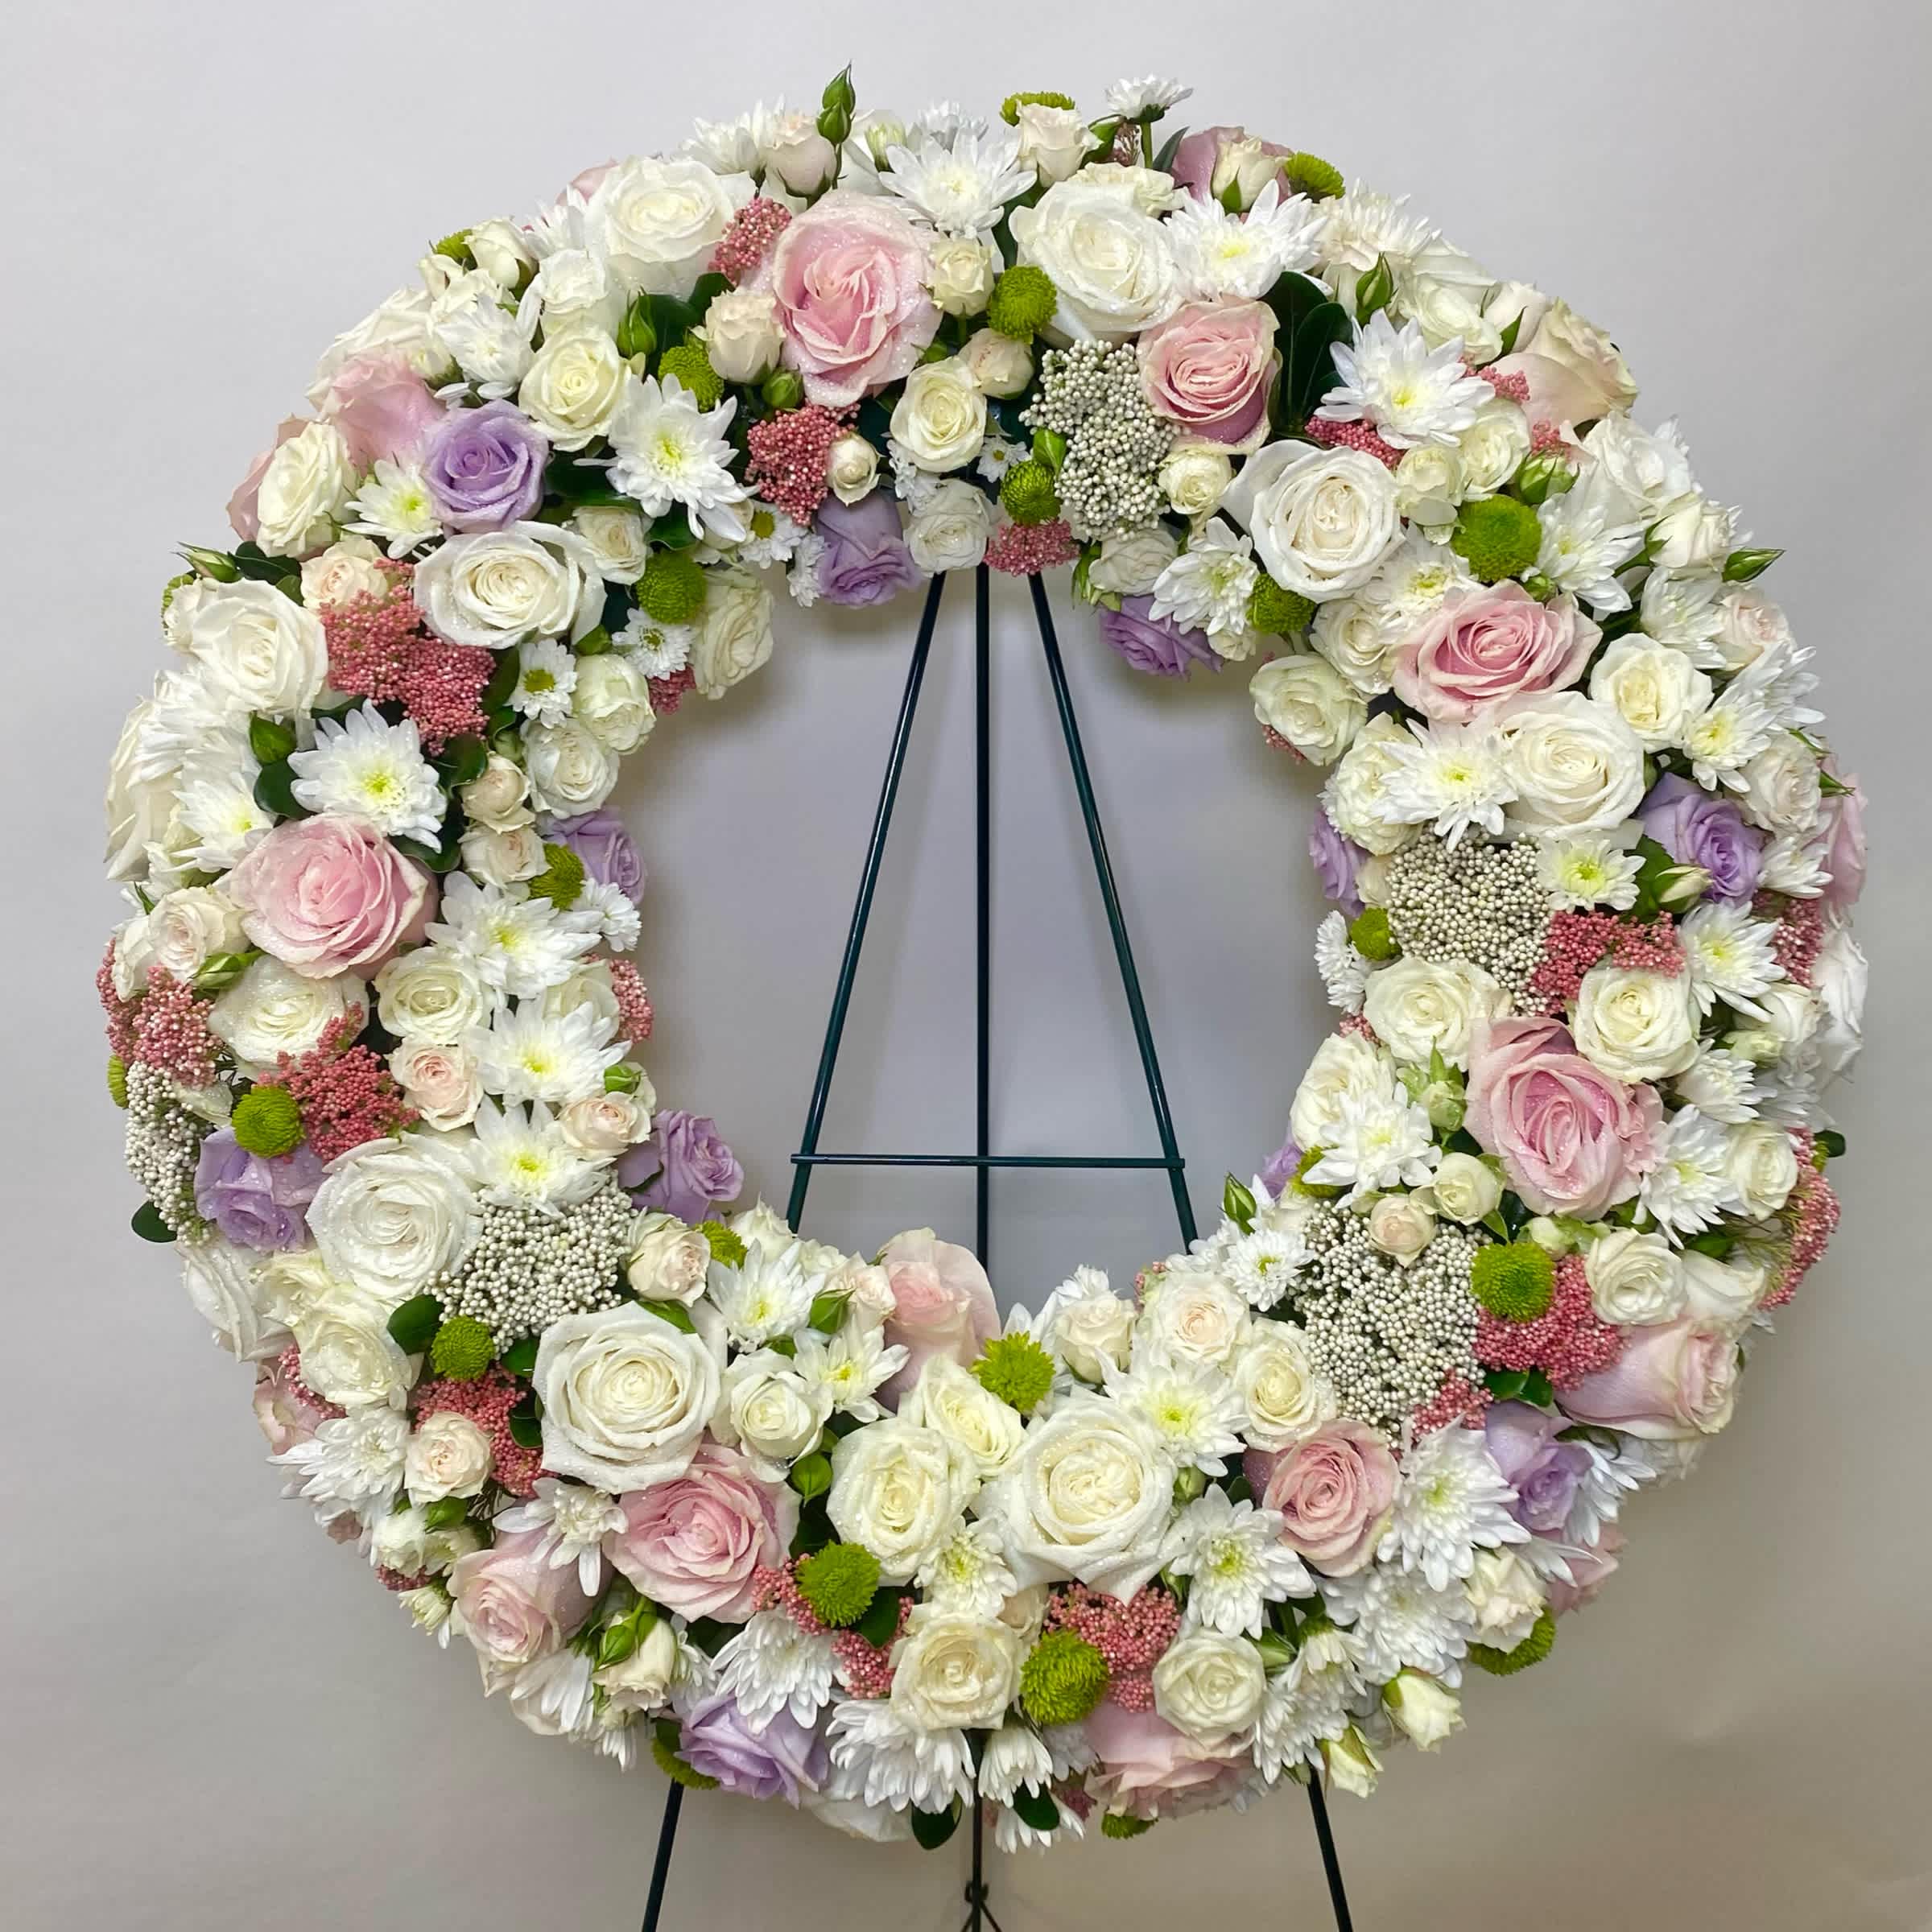 Garden Of Light Wreath - This Wreath Includes White Roses, Light Pink Roses, Lavender Roses, White Spary Roses, White Cushion Mums, Green Button Mums, and White and Pink Rice Flower Or White and Pink Wax Flower. Or as Similar as Possible. 